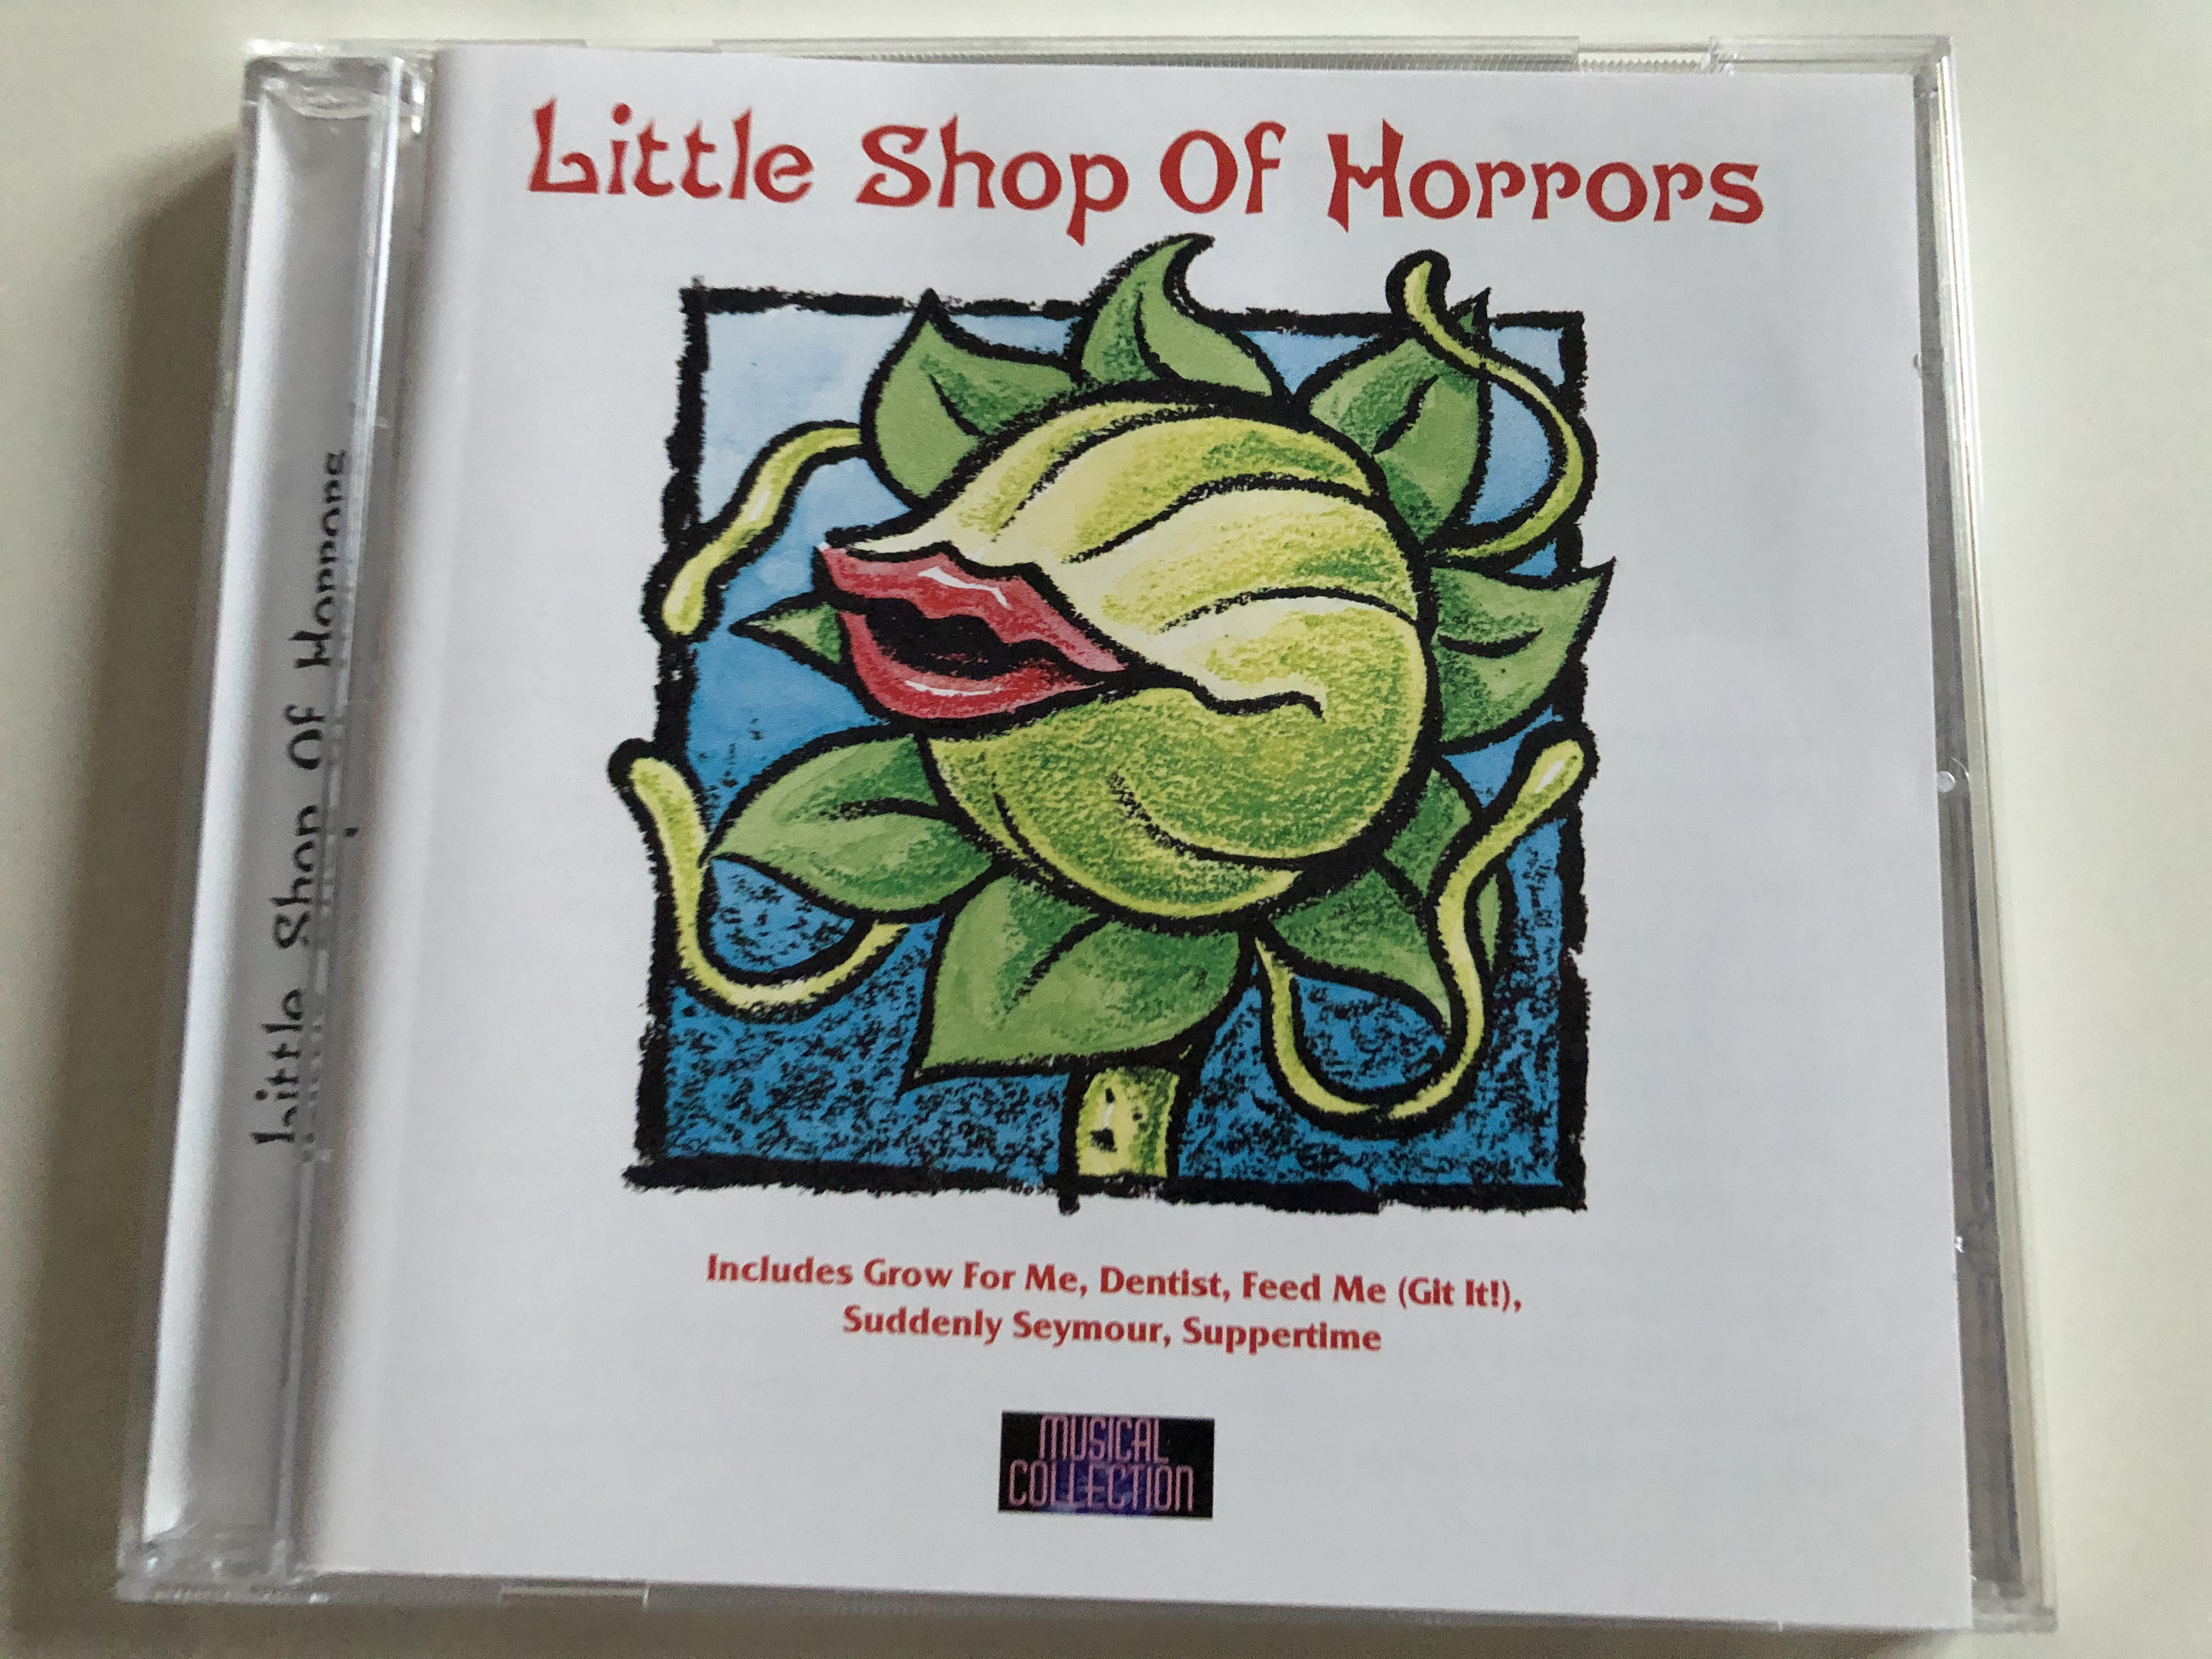 little-shop-of-horrors-includes-grow-for-me-dentist-feed-me-glt-it-suddenly-seymour-suppertime-bellevue-entertainment-audio-cd-1996-8810-2-1-.jpg